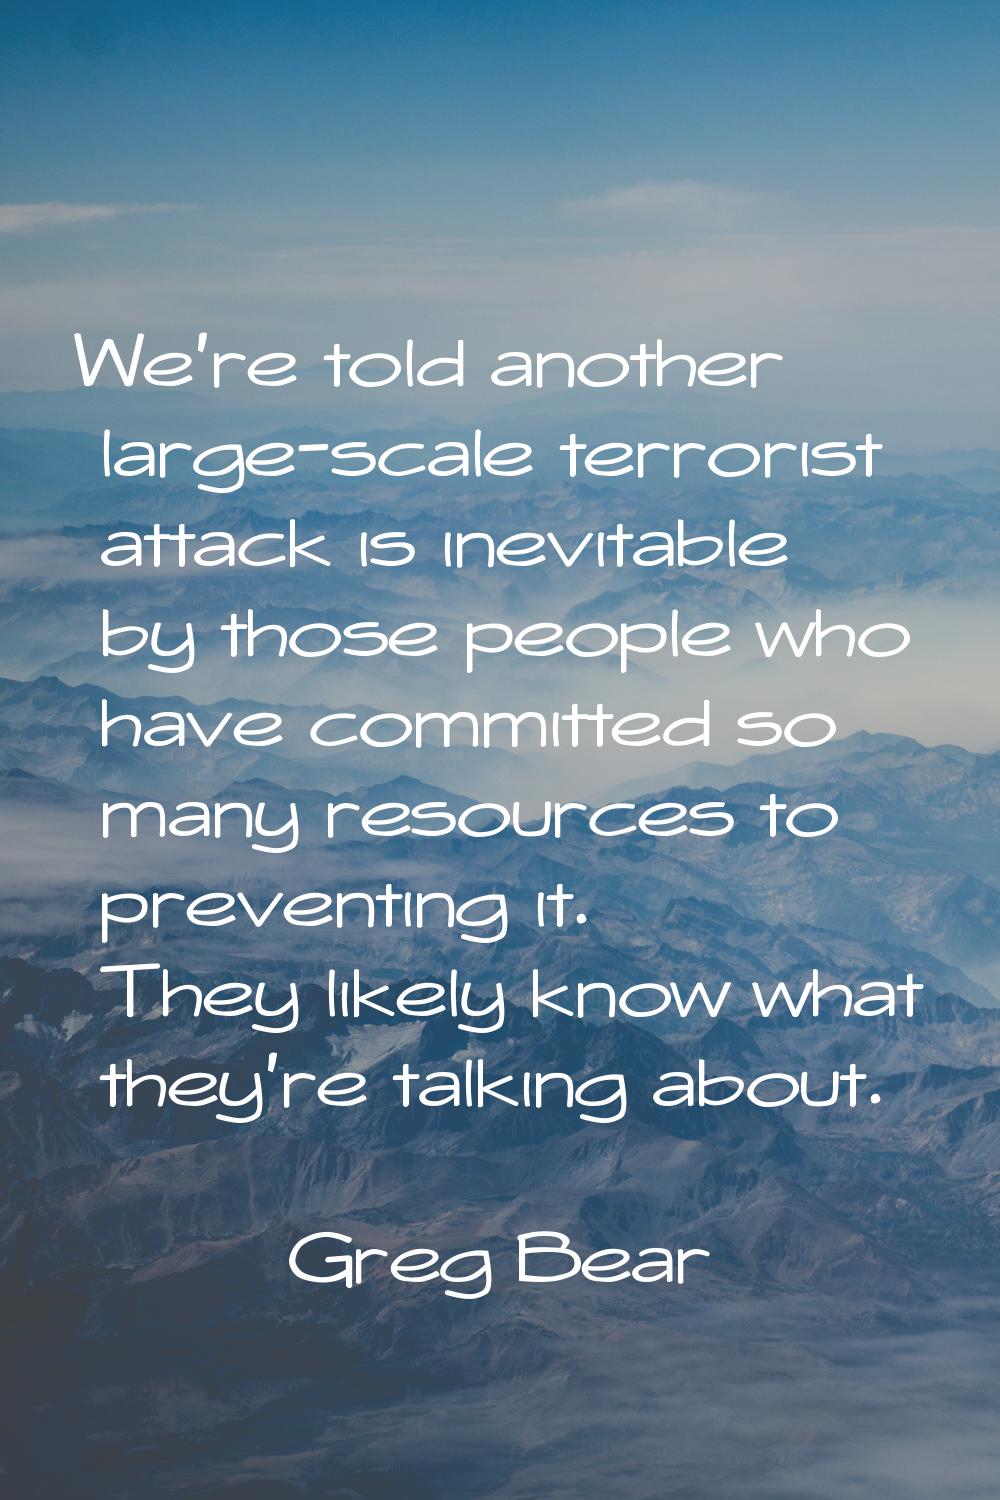 We're told another large-scale terrorist attack is inevitable by those people who have committed so